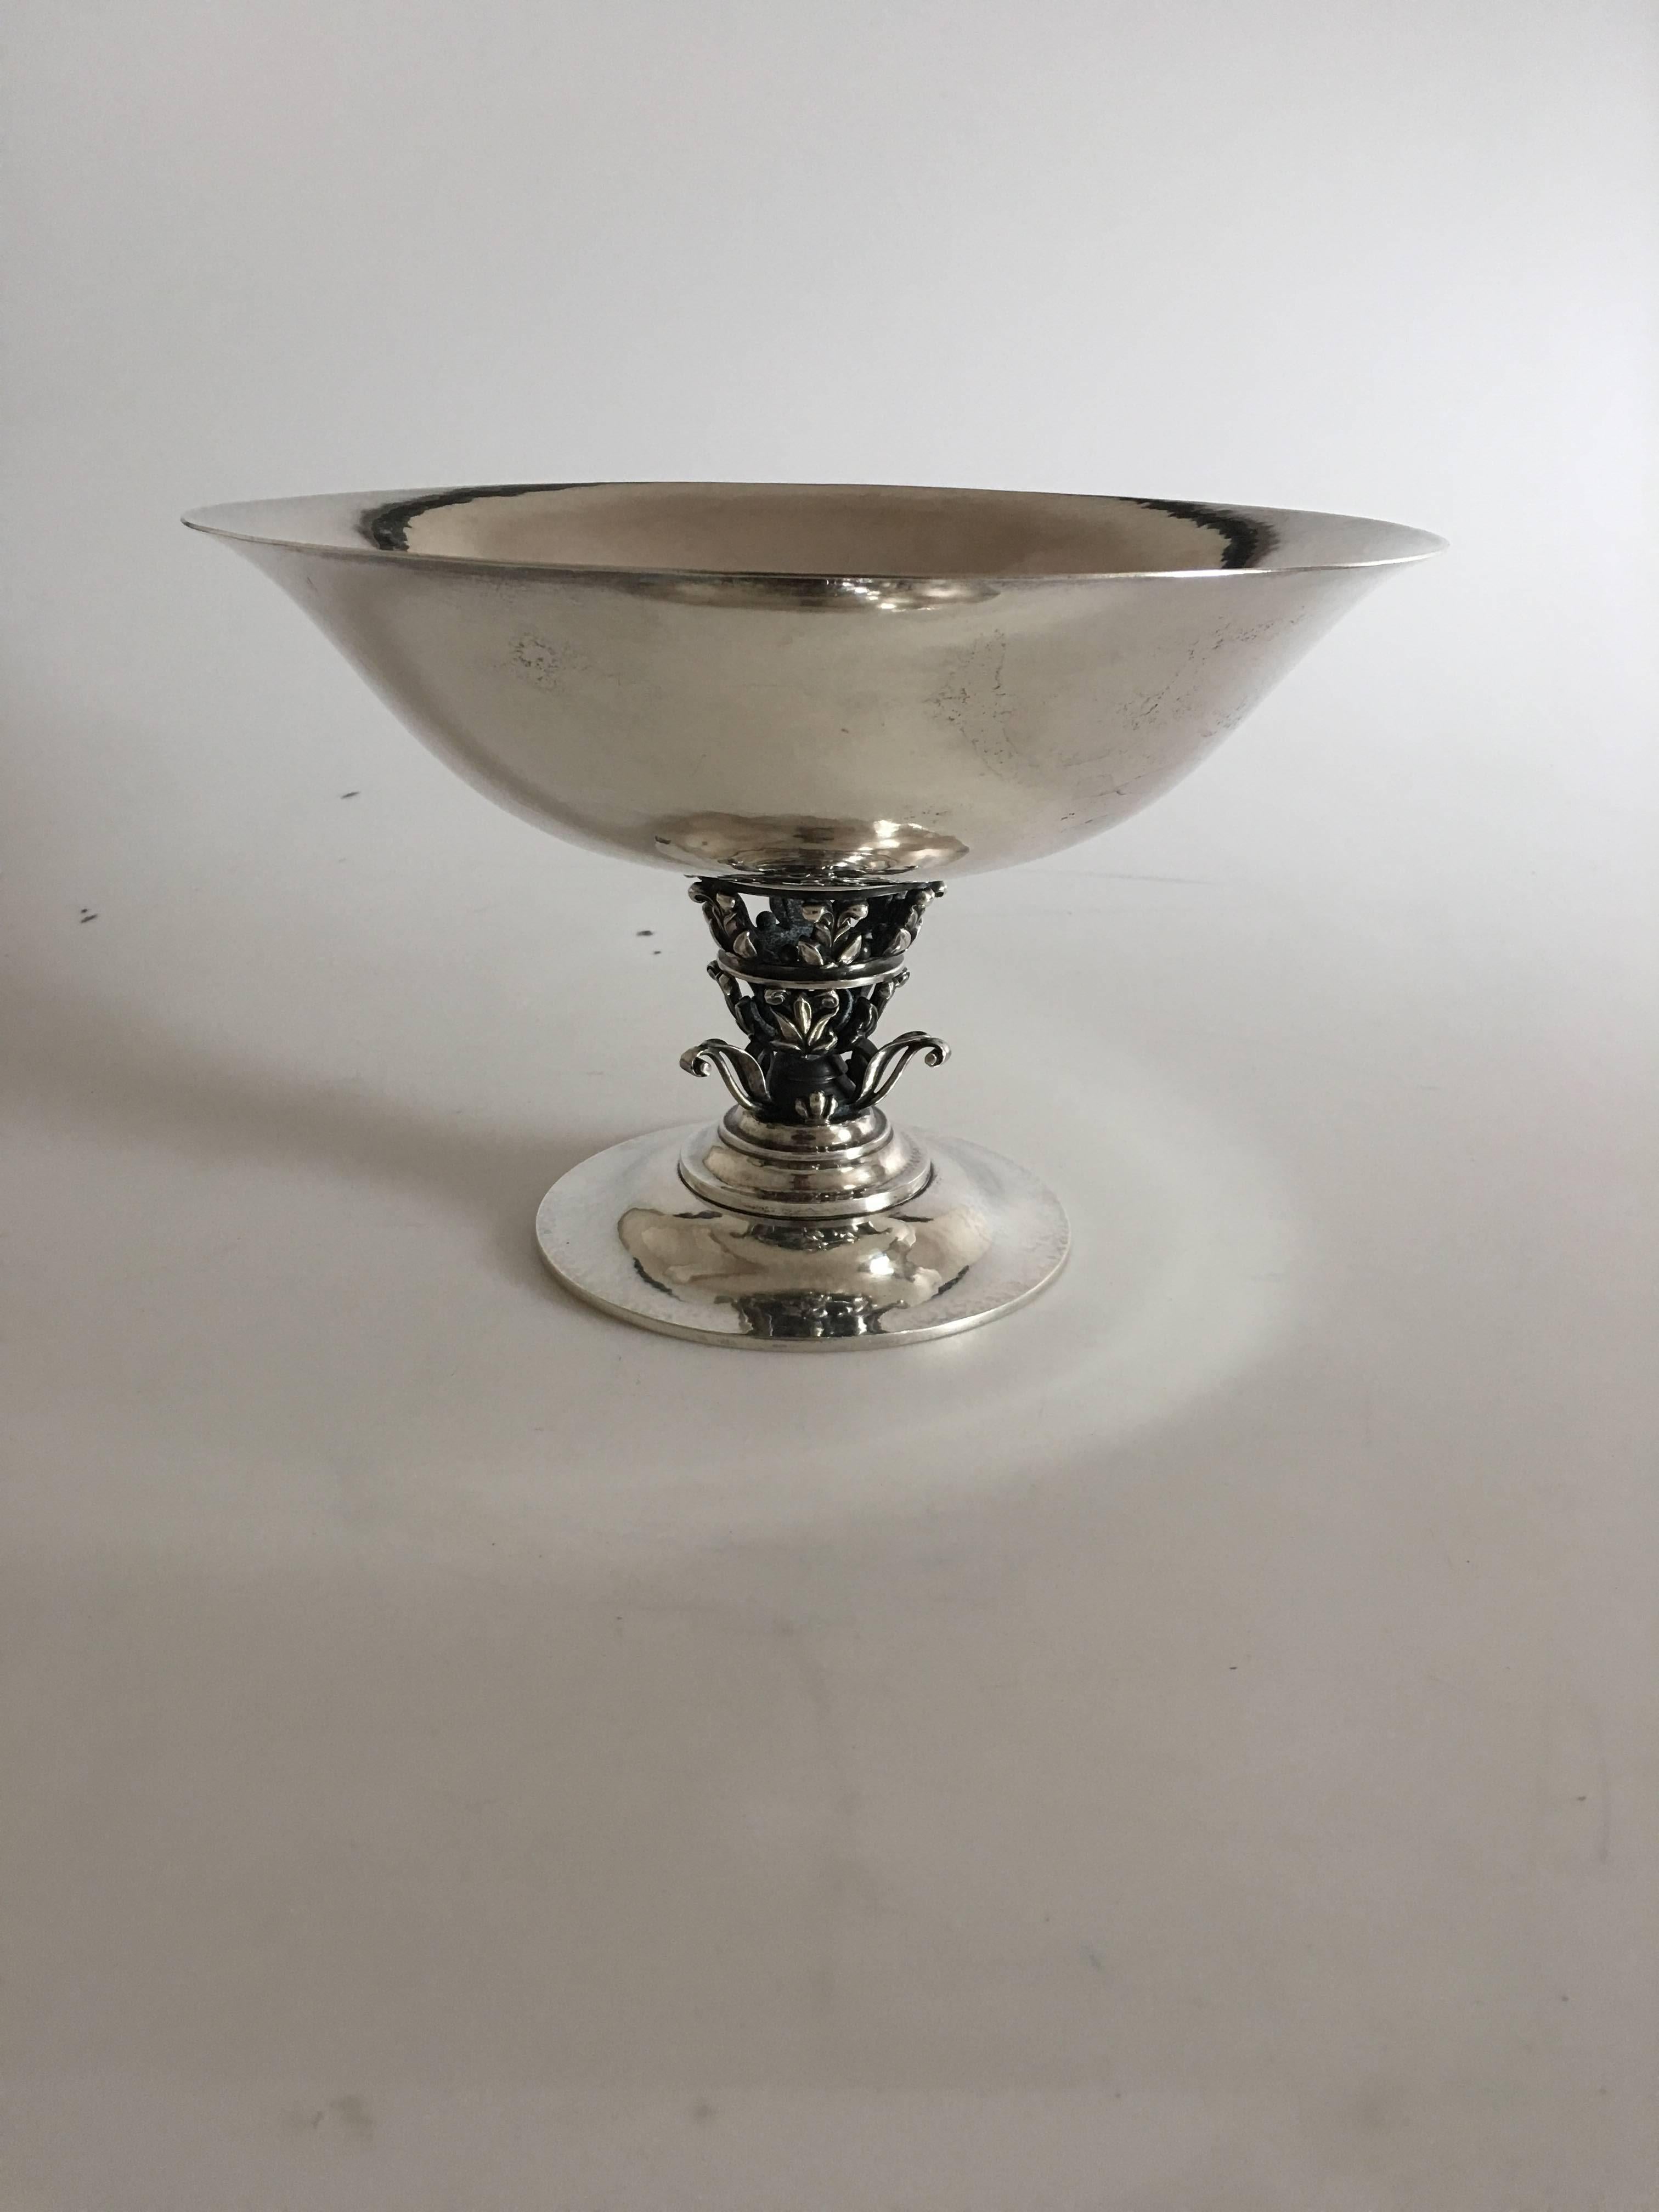 Danish Georg Jensen Sterling Silver Footed Bowl #172 For Sale